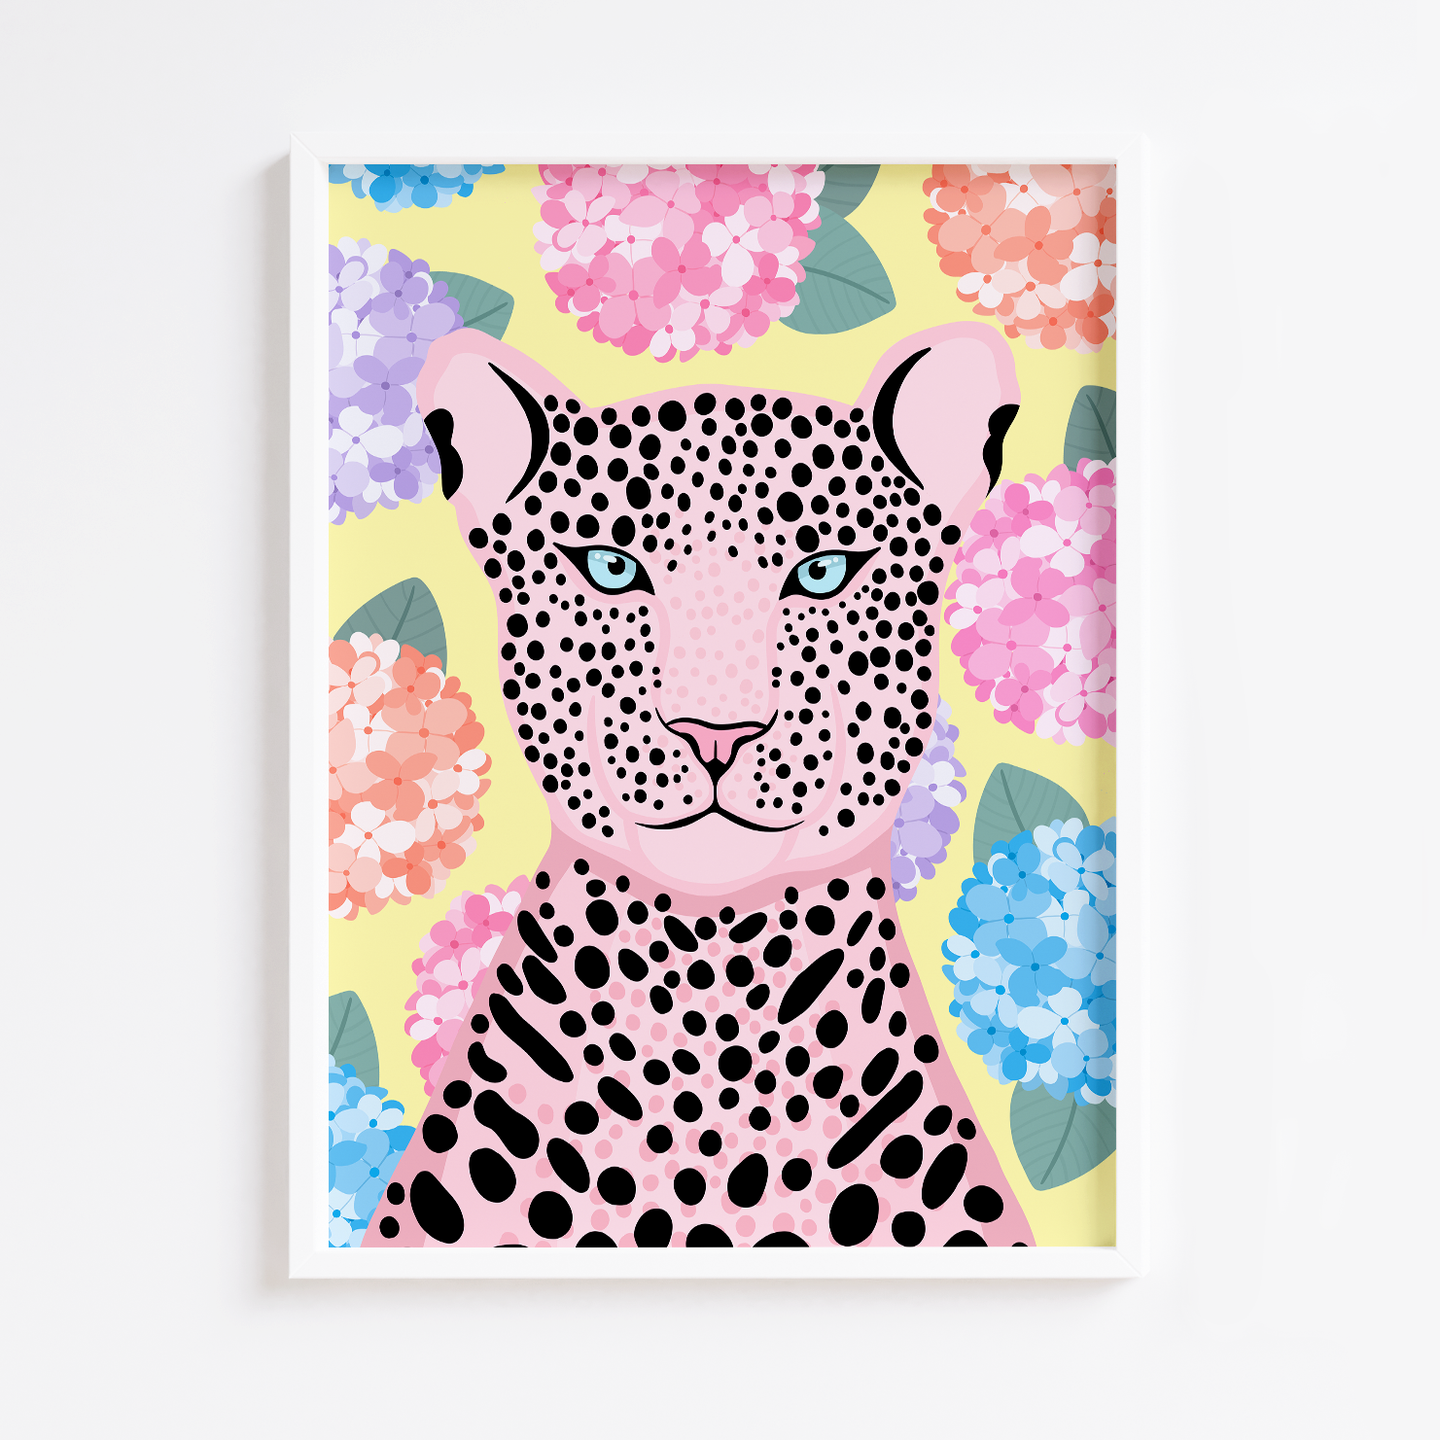 'Hydrangea Leopard in Yellow' - PeachiPrints X Colour Pop at Home